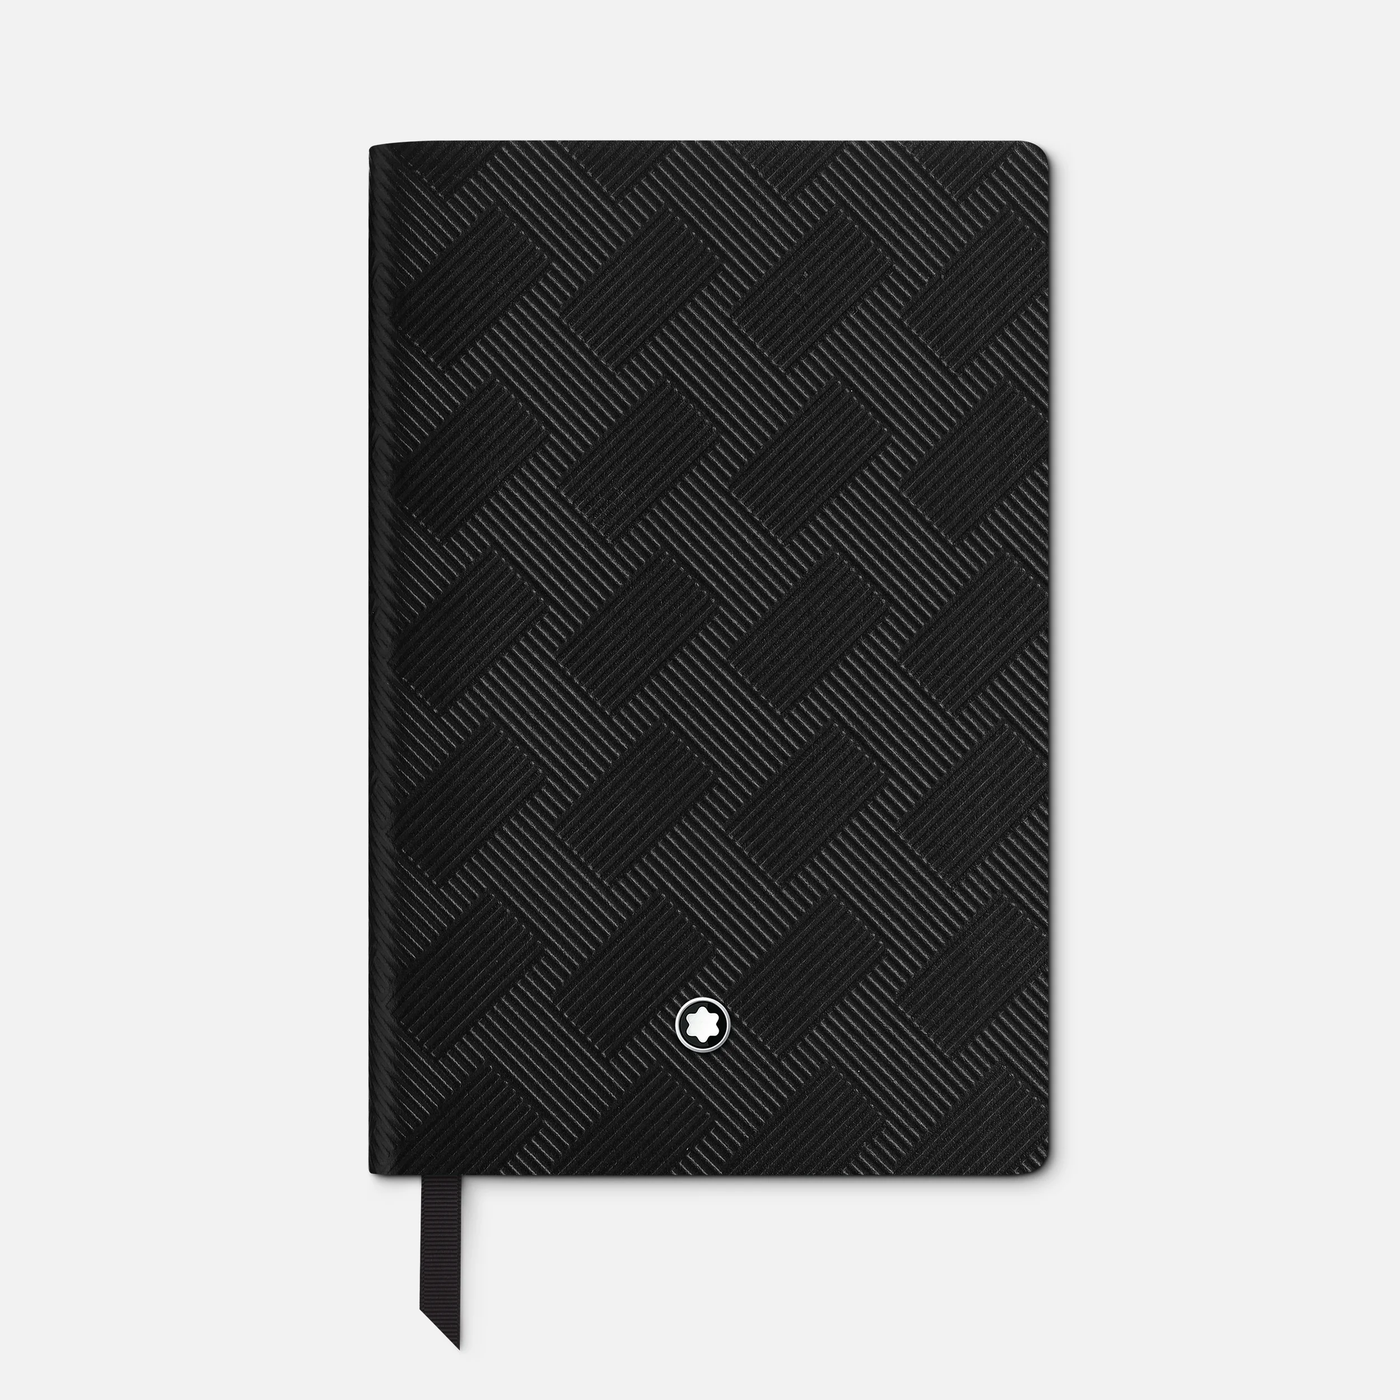 Montblanc Fine Stationery Notebook #148 Extreme 3.0 Black Lined Notebook